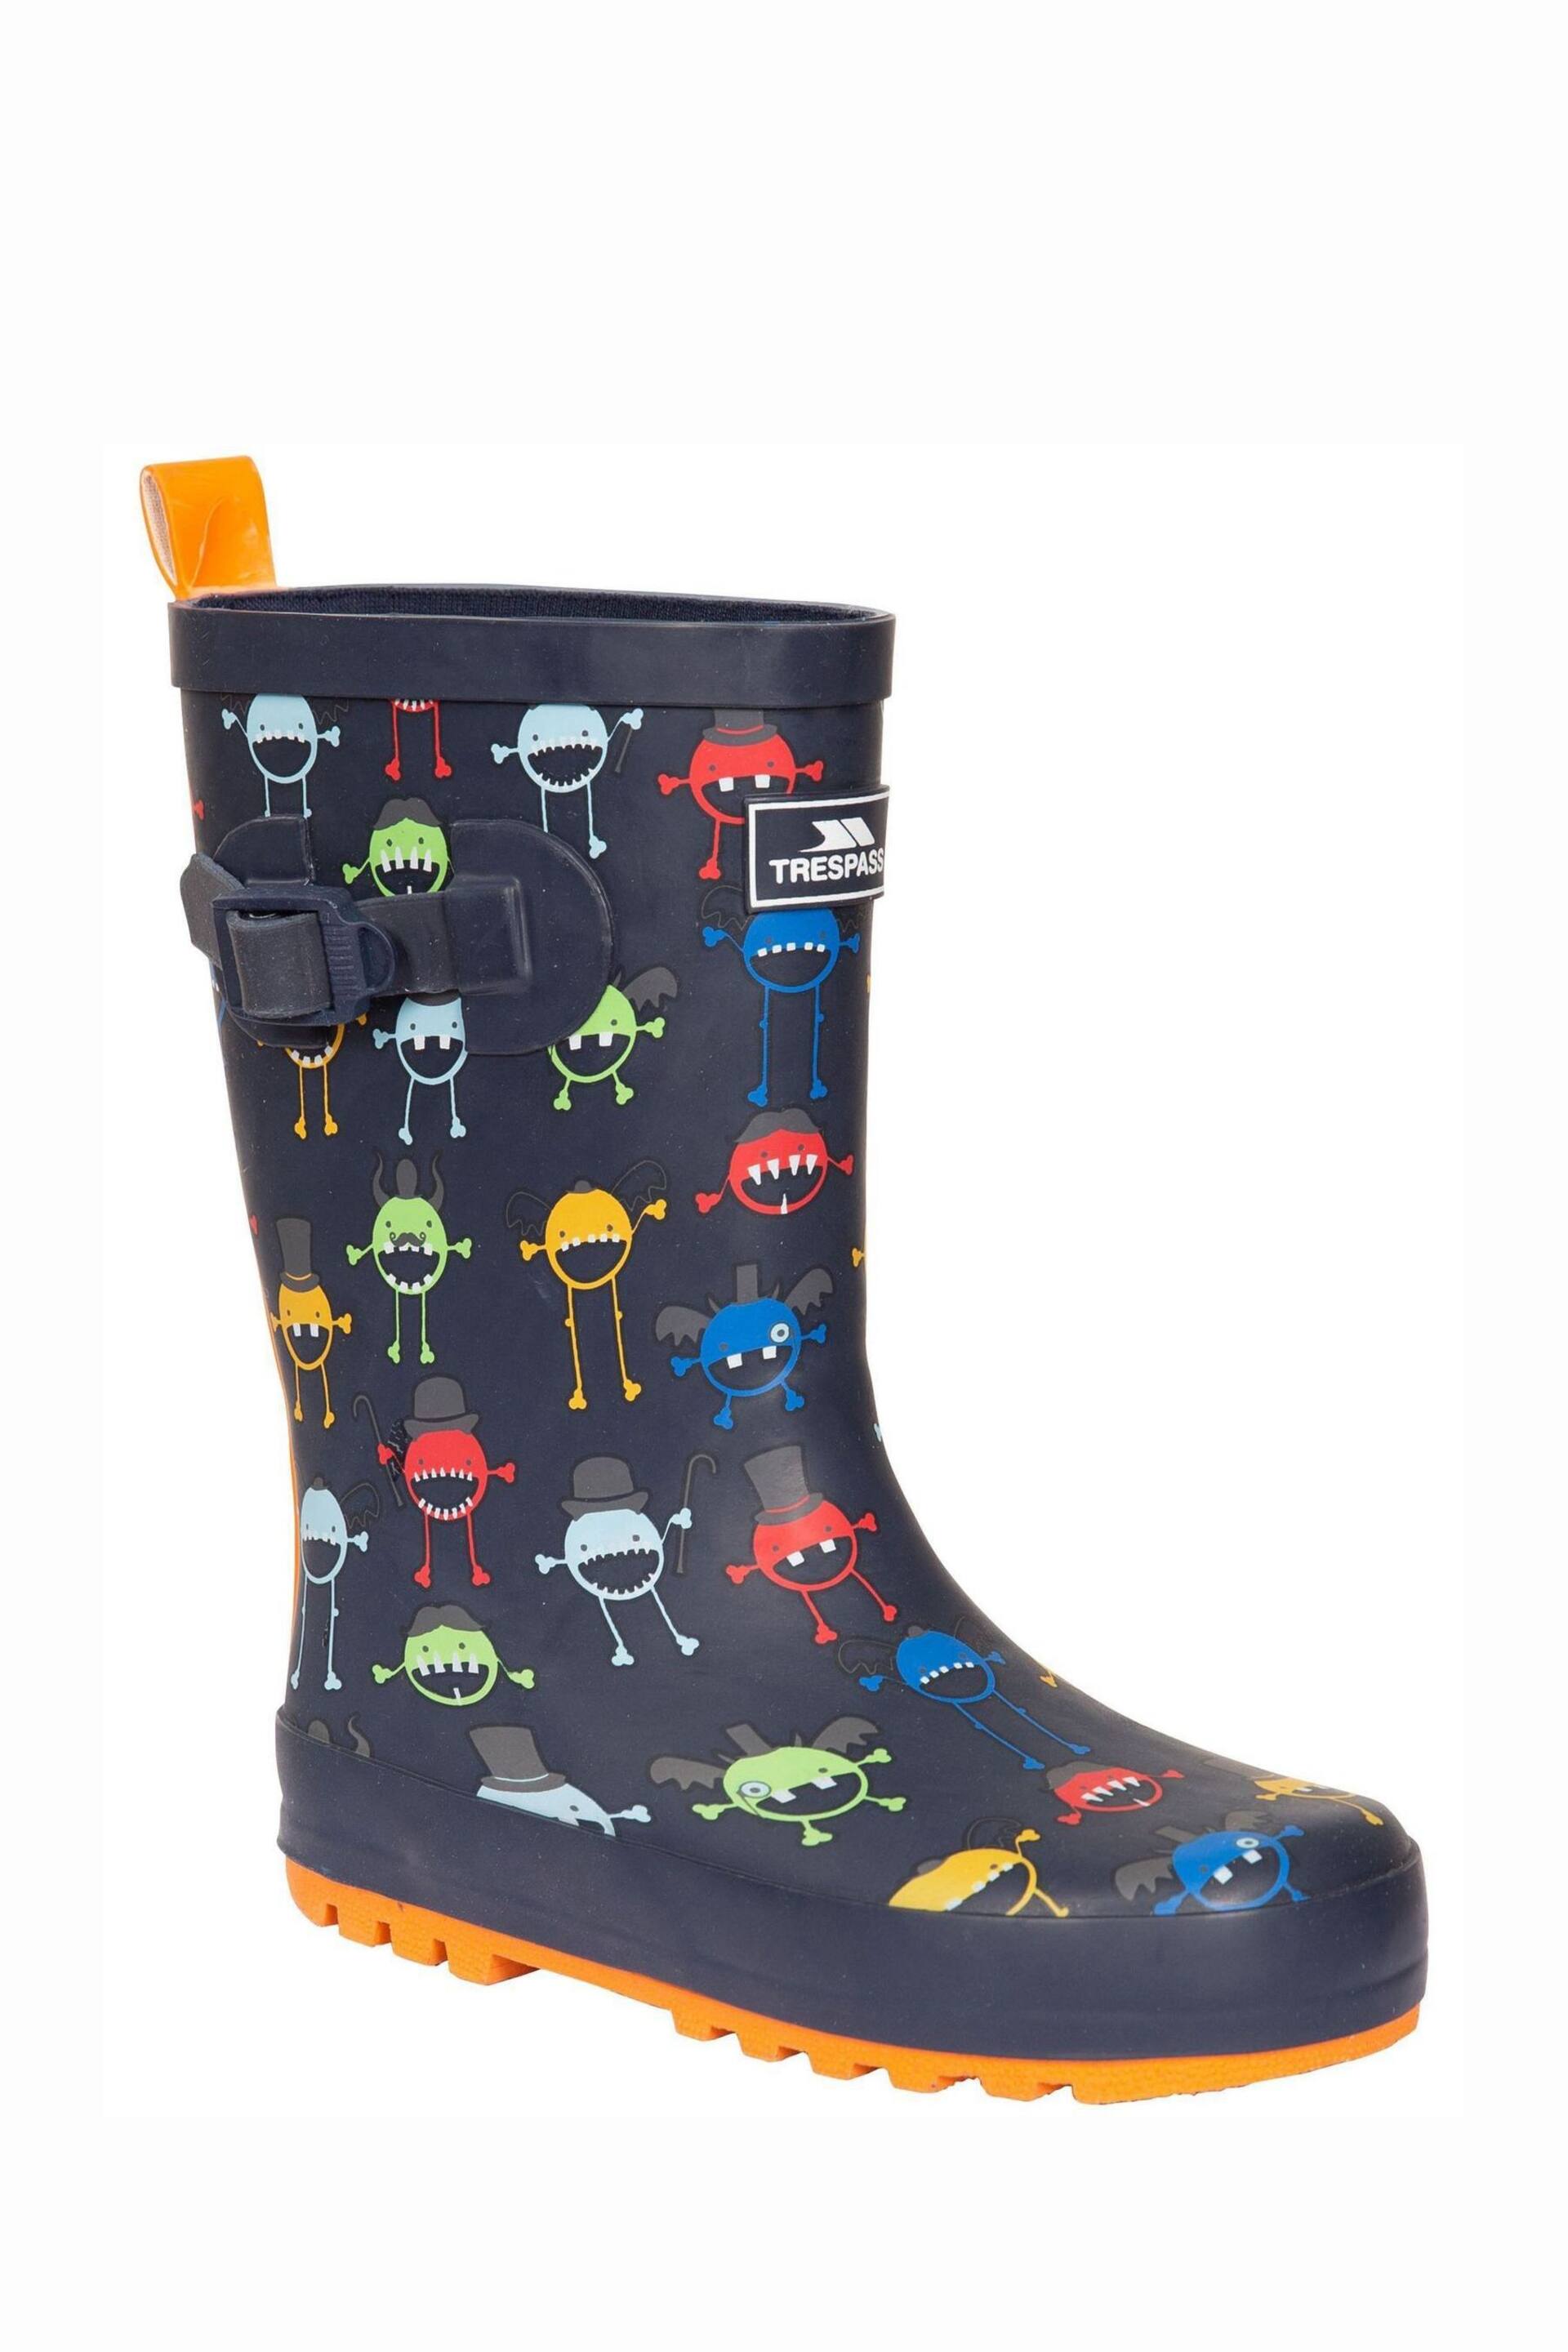 Trespass Kids Puddle Wellies - Image 5 of 6